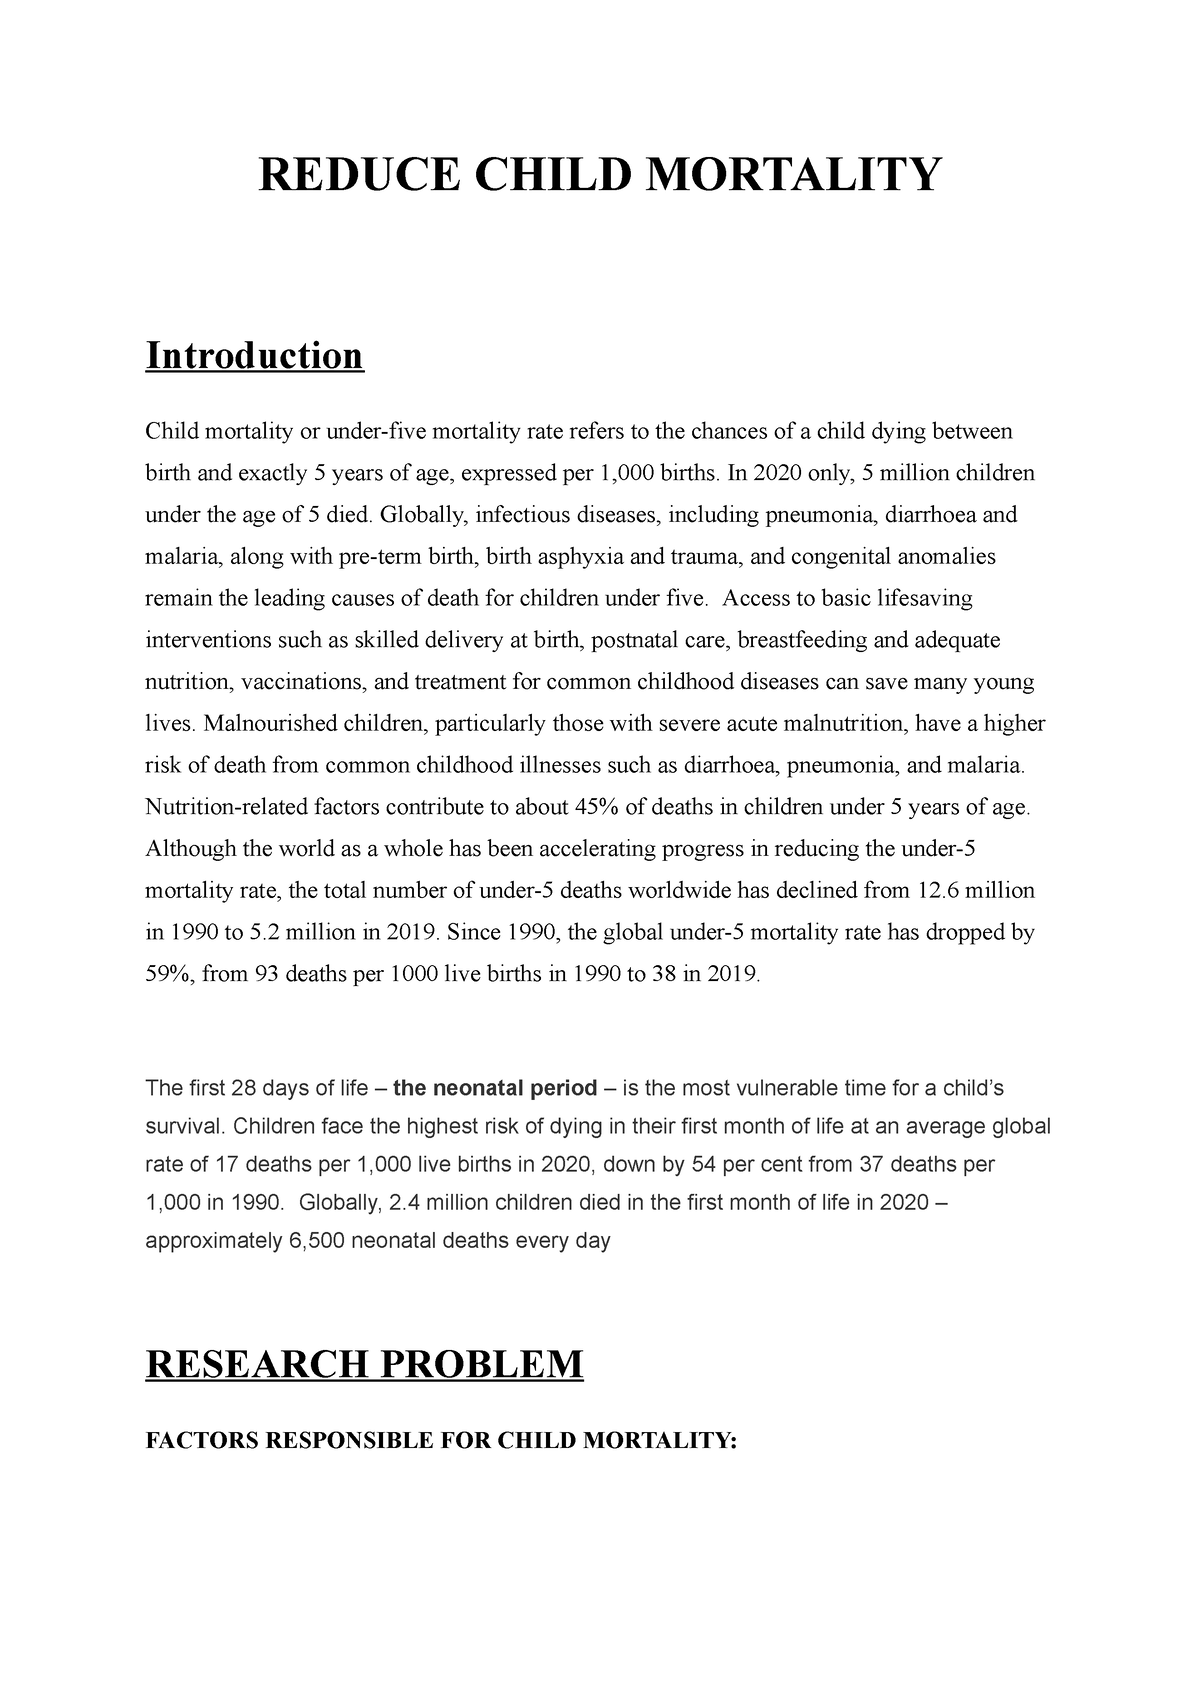 essay about reduce child mortality